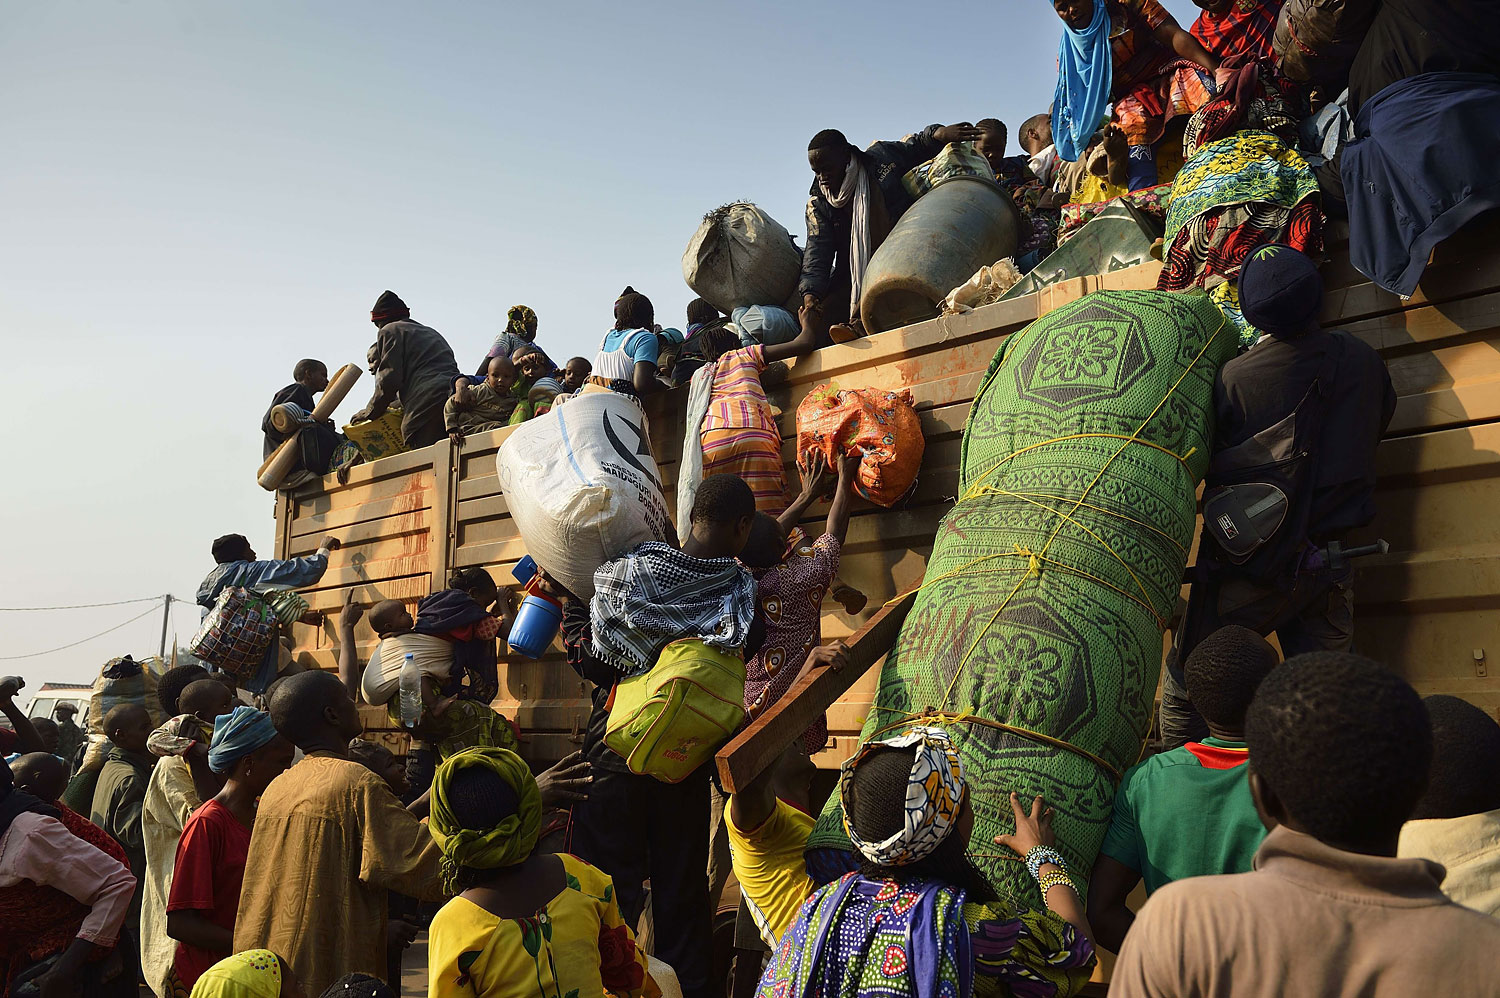 Chadian civilians climb on a military chadian truck to go back to Chad on Jan. 15, 2014 in the PK12 district of Bangui.